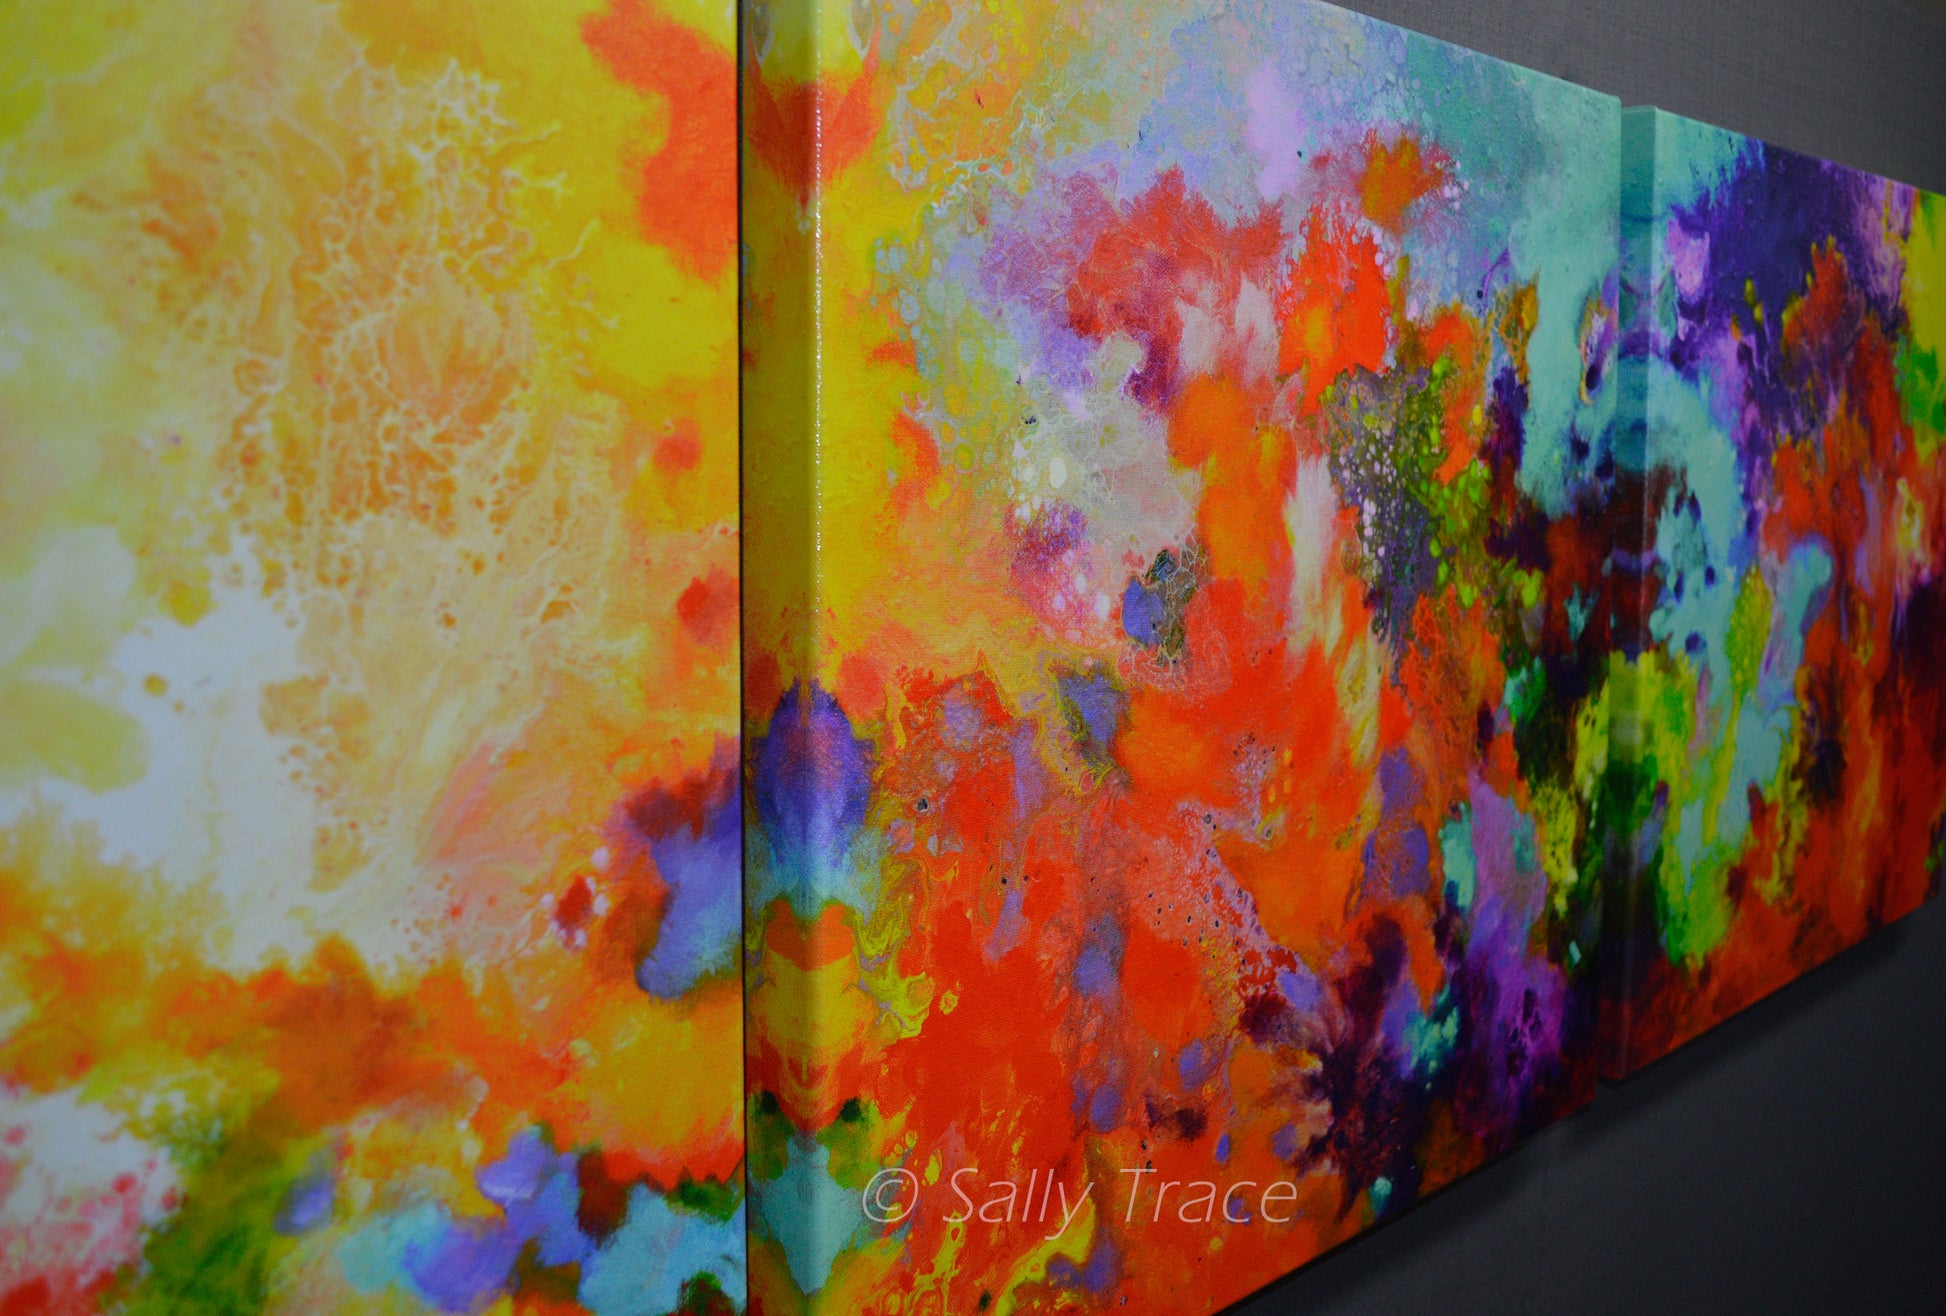 Momentum, contemporary abstract art triptych painting prints on canvas by Sally Trace. Large contemporary colorful modern modern art triptych prints on stretched canvas made from my original acrylic painting "Momentum". Coral, teal, yellow, violet and turquoise fine art prints for your bedroom, office, living room, dining room. Modern artwork horizontal prints for sale online, orange turquoise art,  modern living room wall art painting.